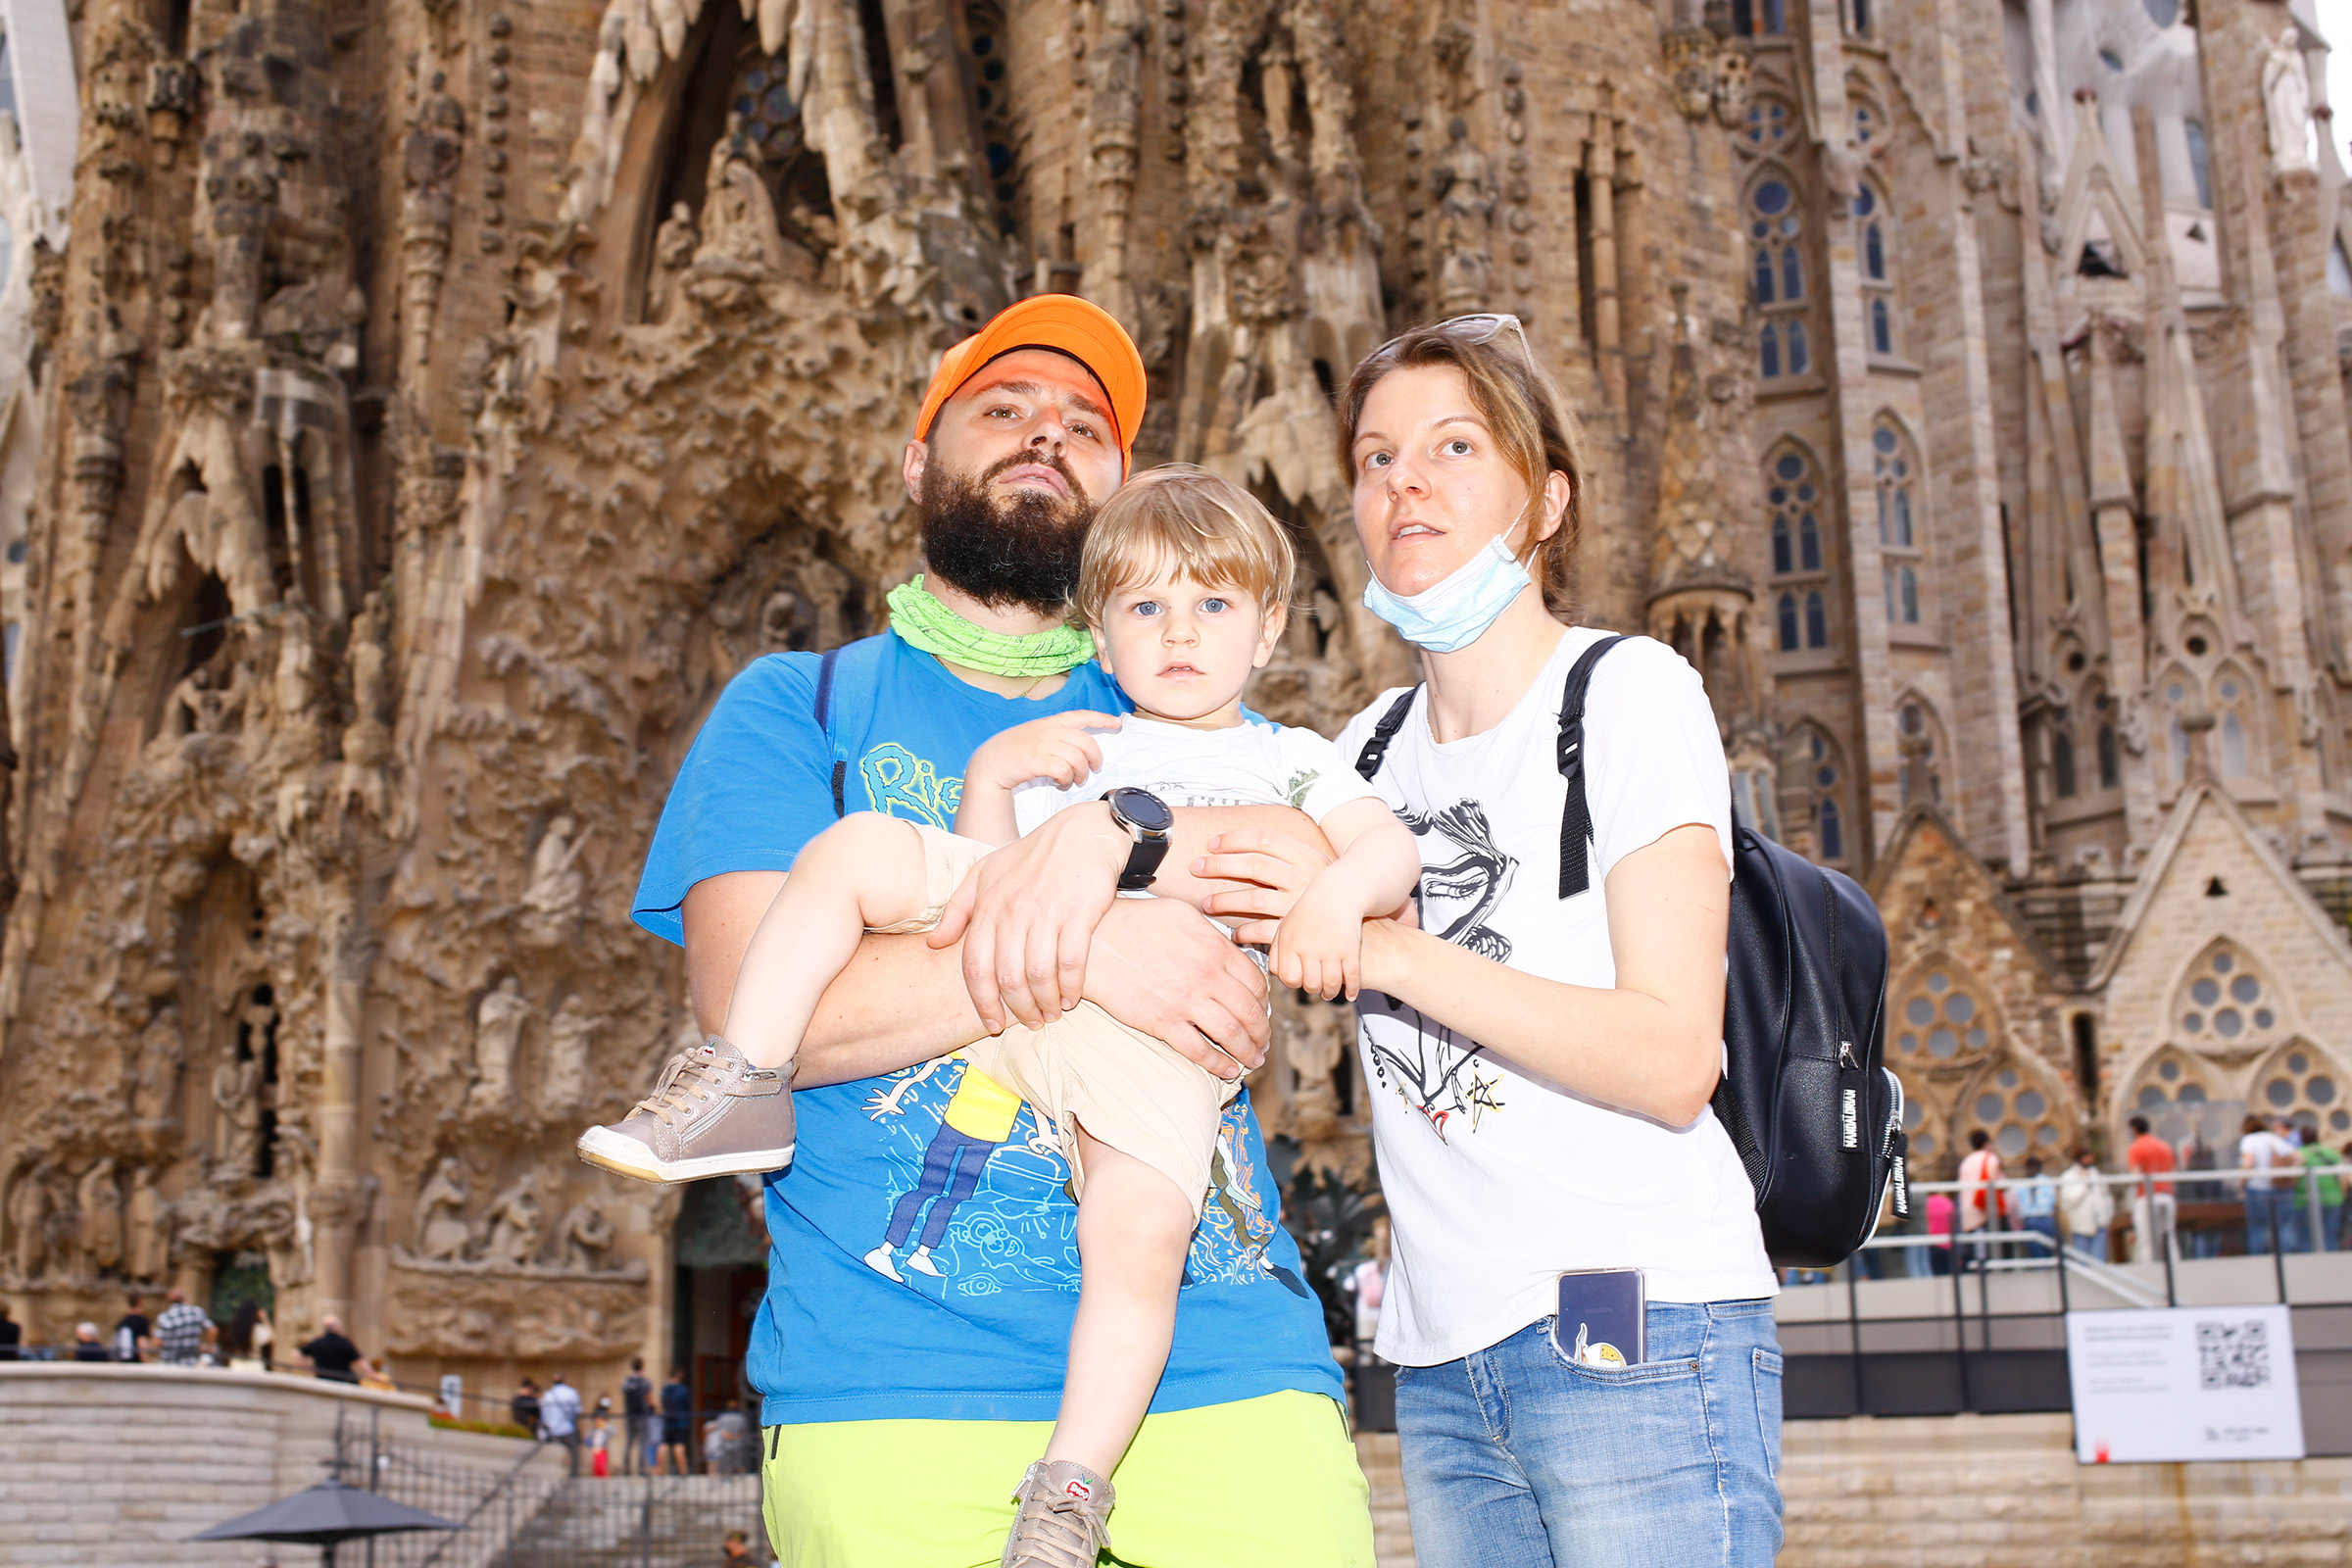 Tourists visit the recently reopened Sagrada Familia on June 6. (Ricardo Cases for TIME)